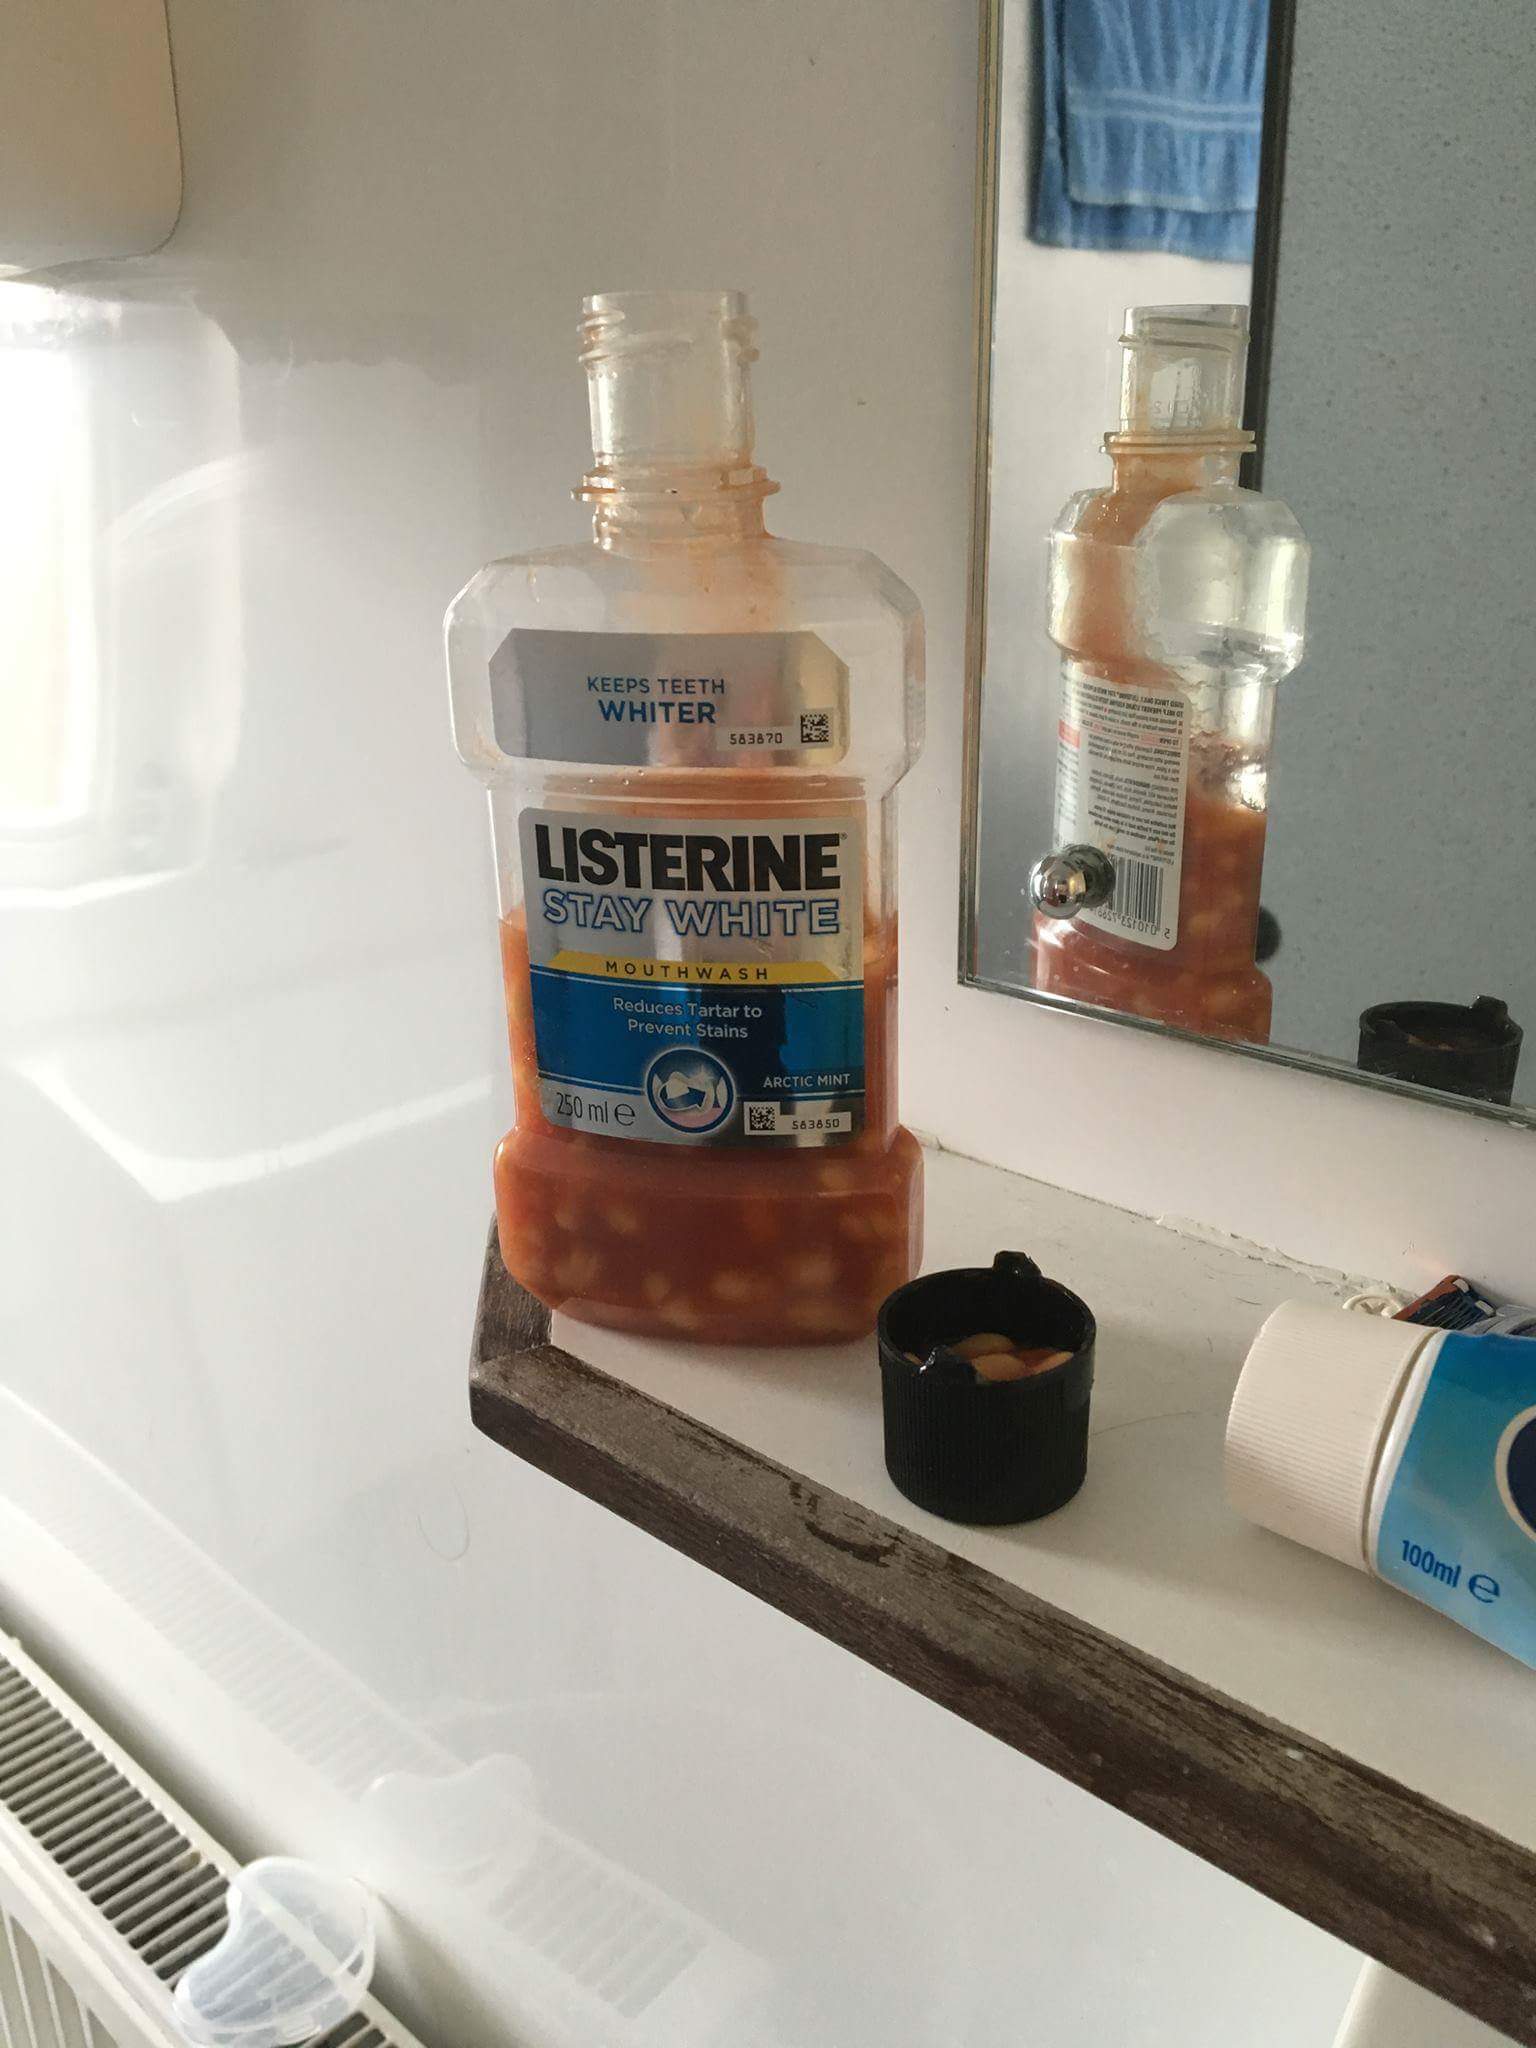 15 Images Full Of Beans That Will Make You Say WTF